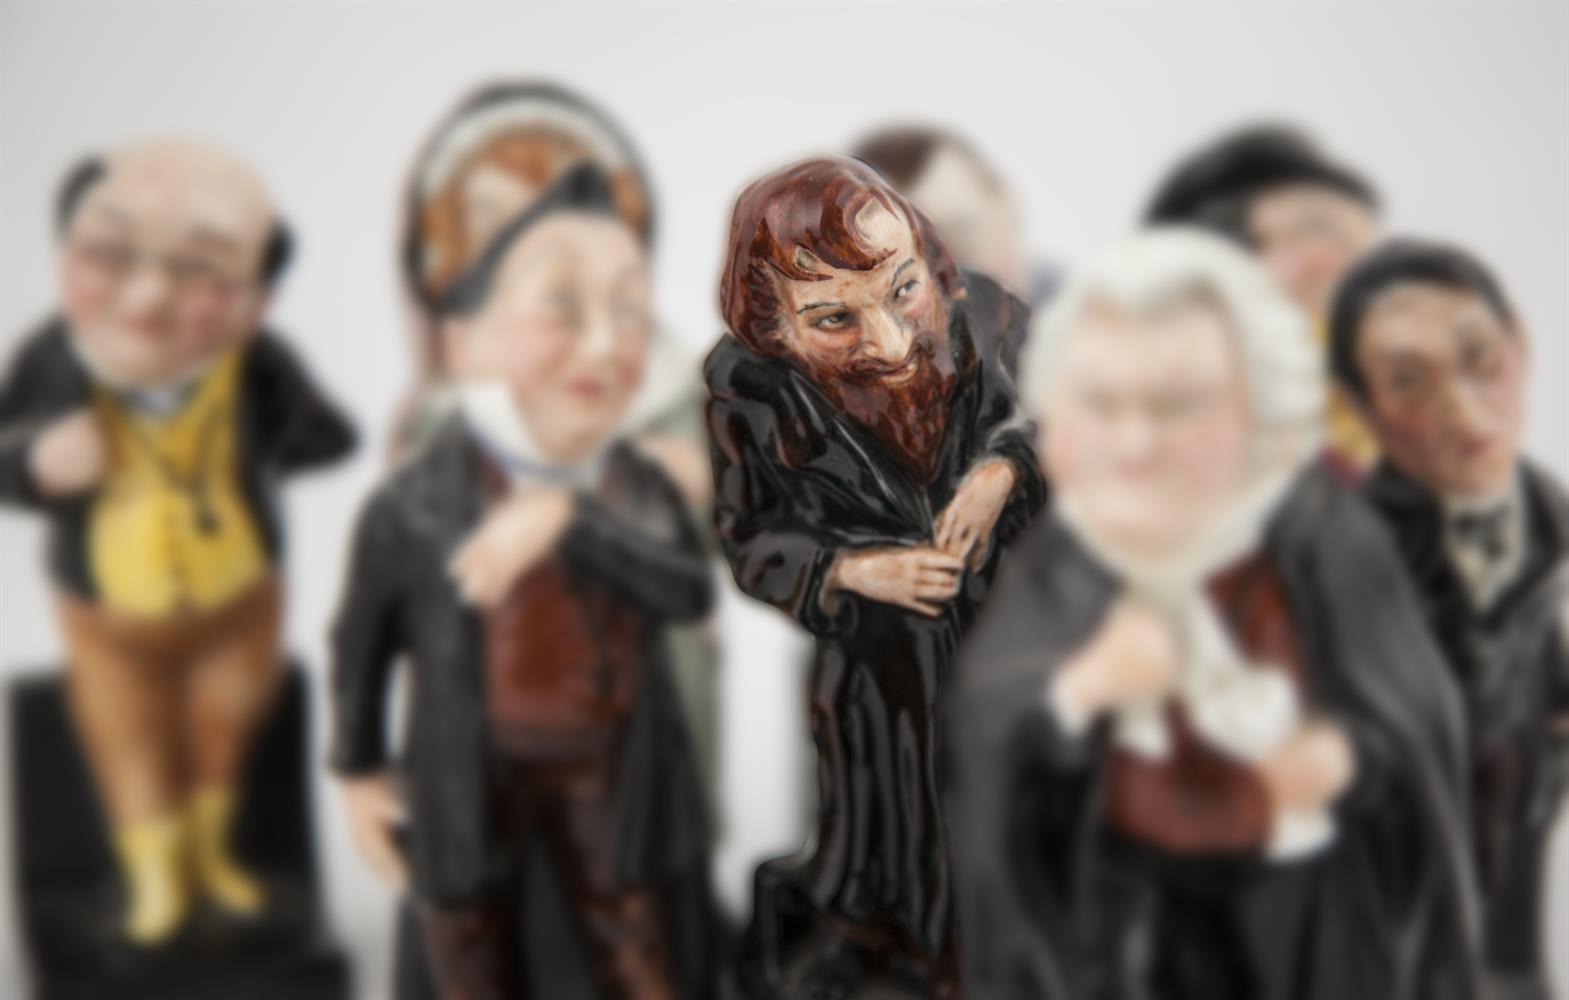 A SET OF EIGHT ROYAL DOULTON CARICATURE PORCELAIN FIGURES, depicting various characters from - Image 3 of 3